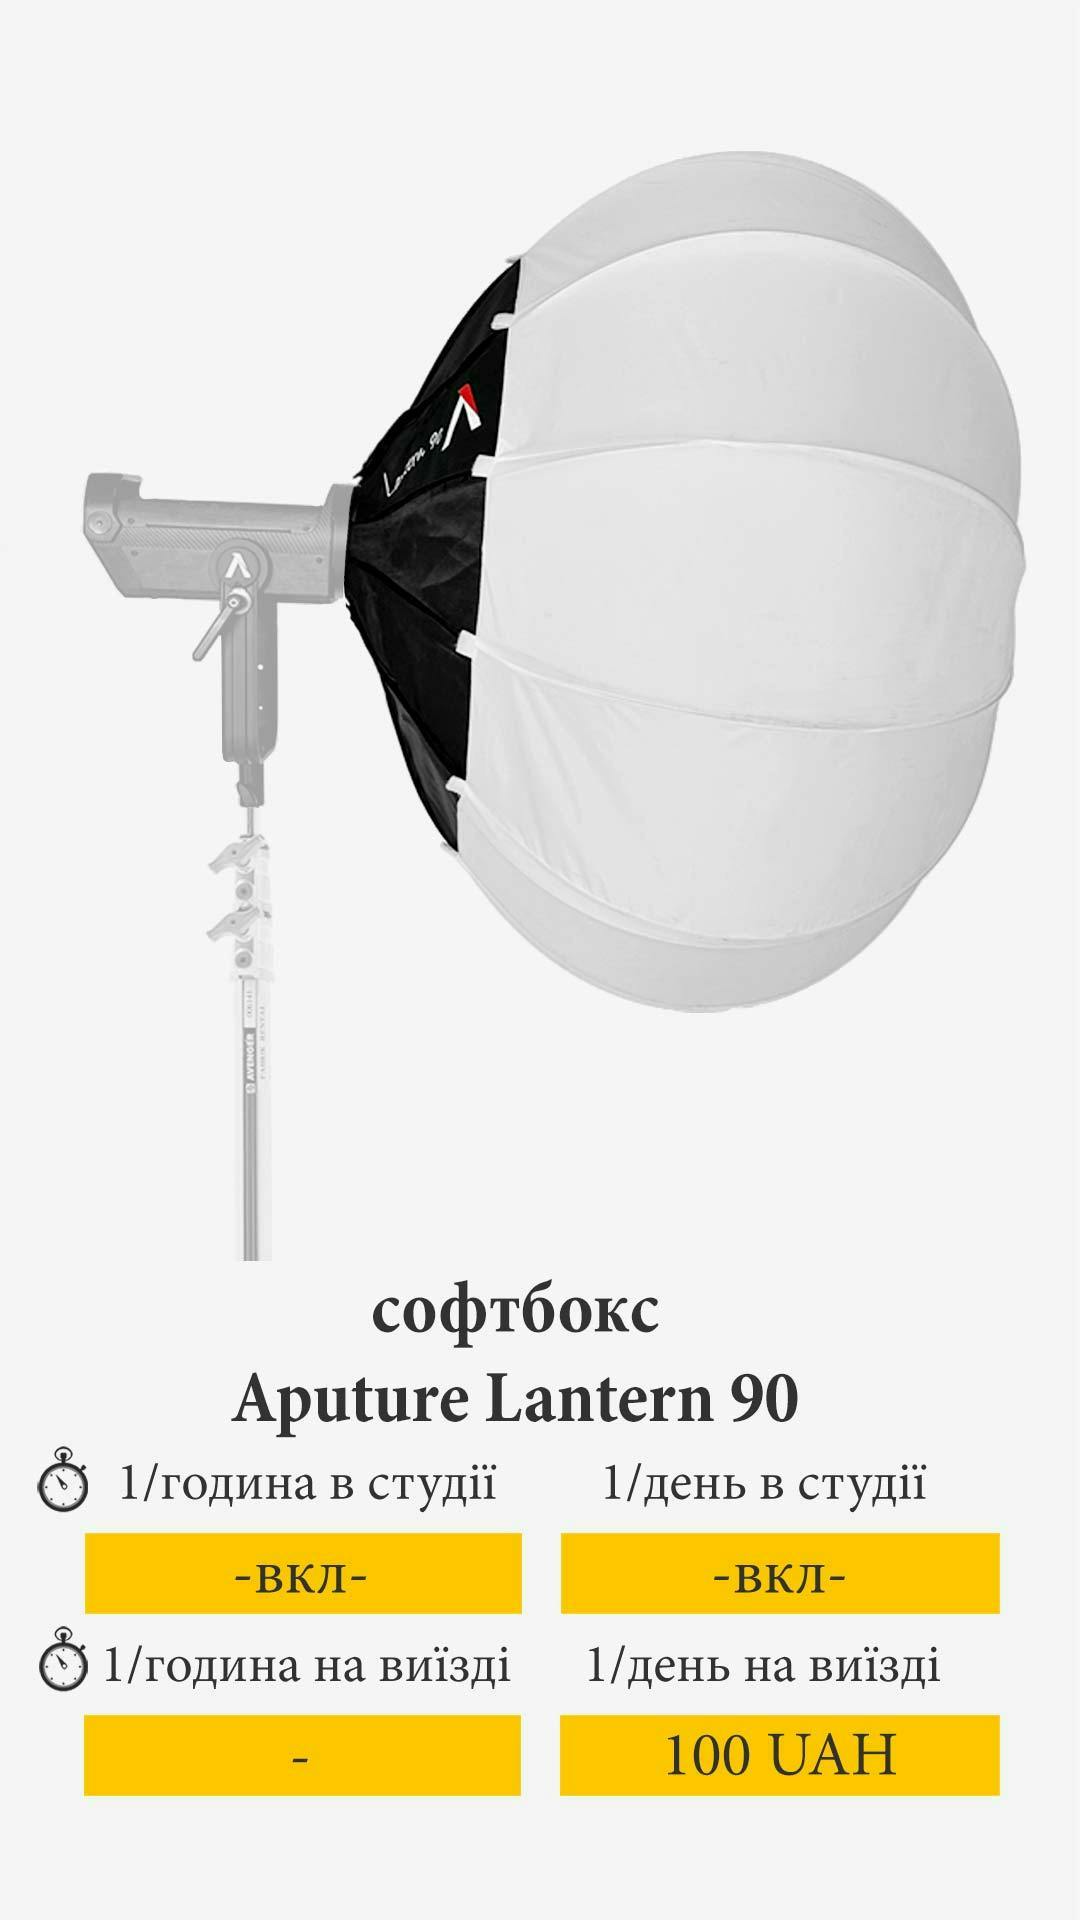 Cover image from aputure-lantern-90